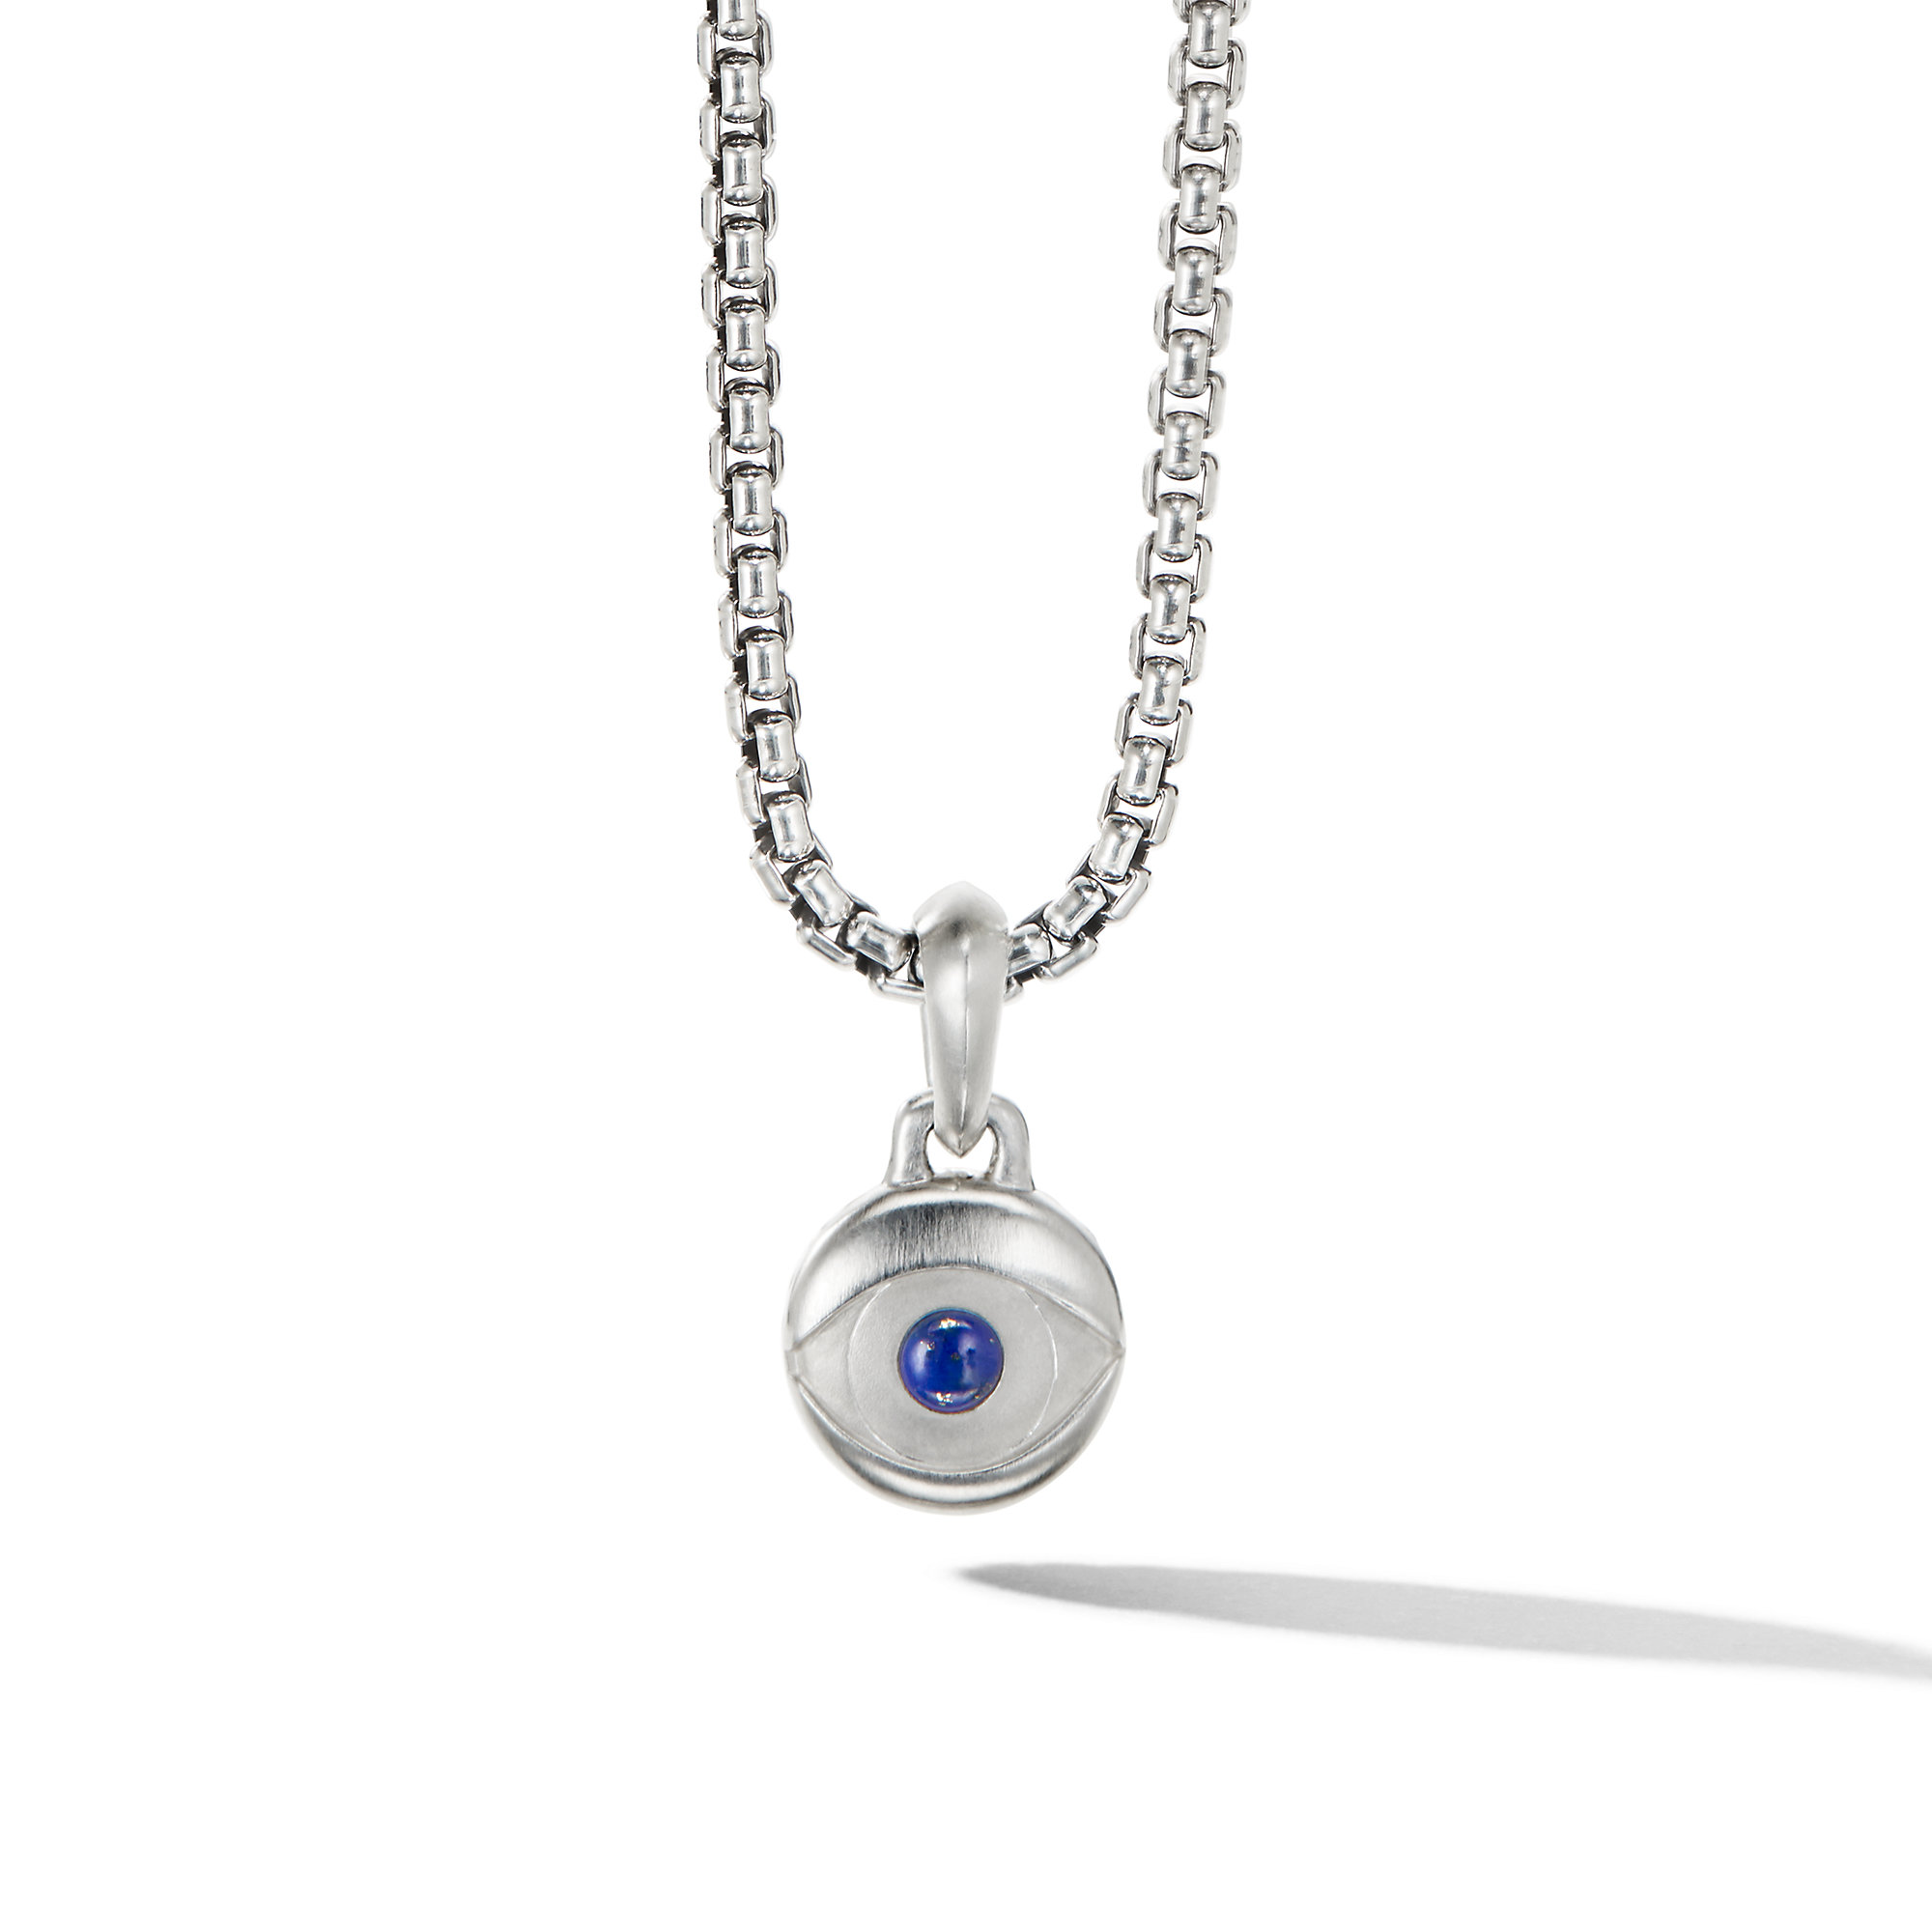 Evil Eye Amulet in Sterling Silver with Lapis